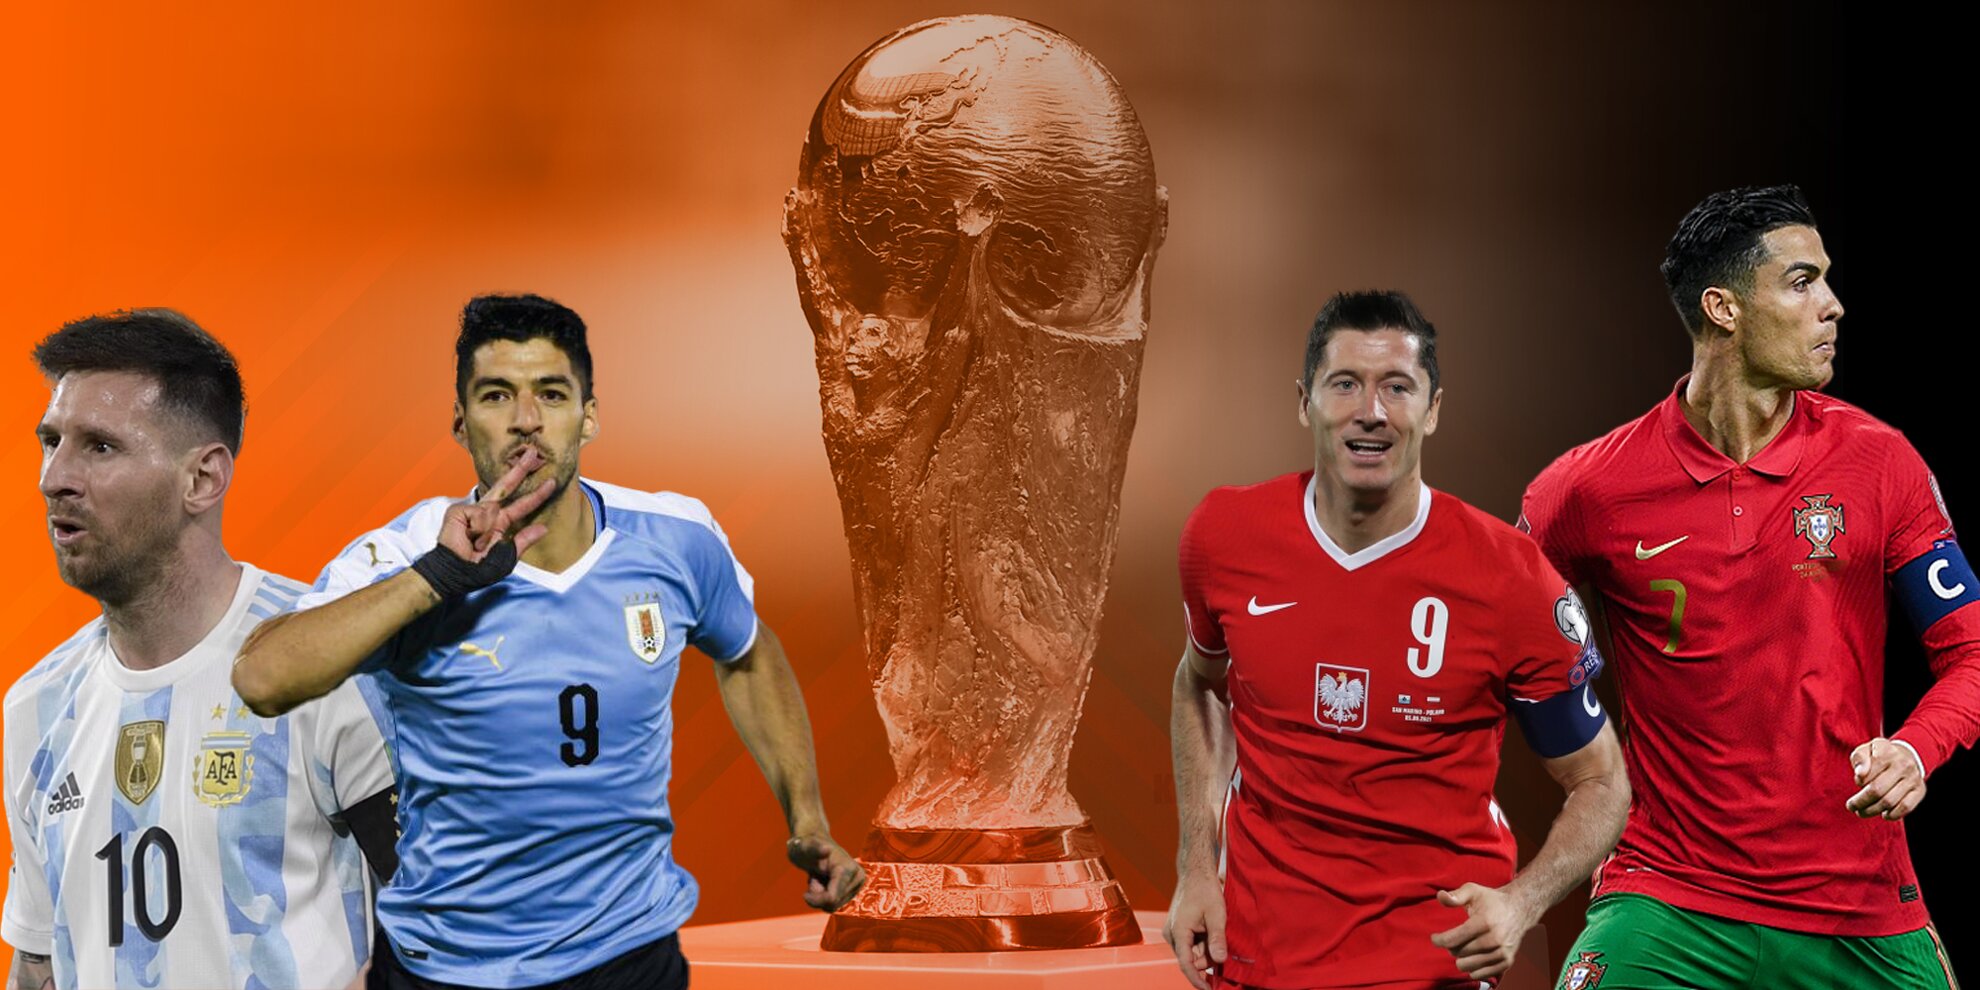 Top 10 matches to look forward to in FIFA World Cup 2022 group stage